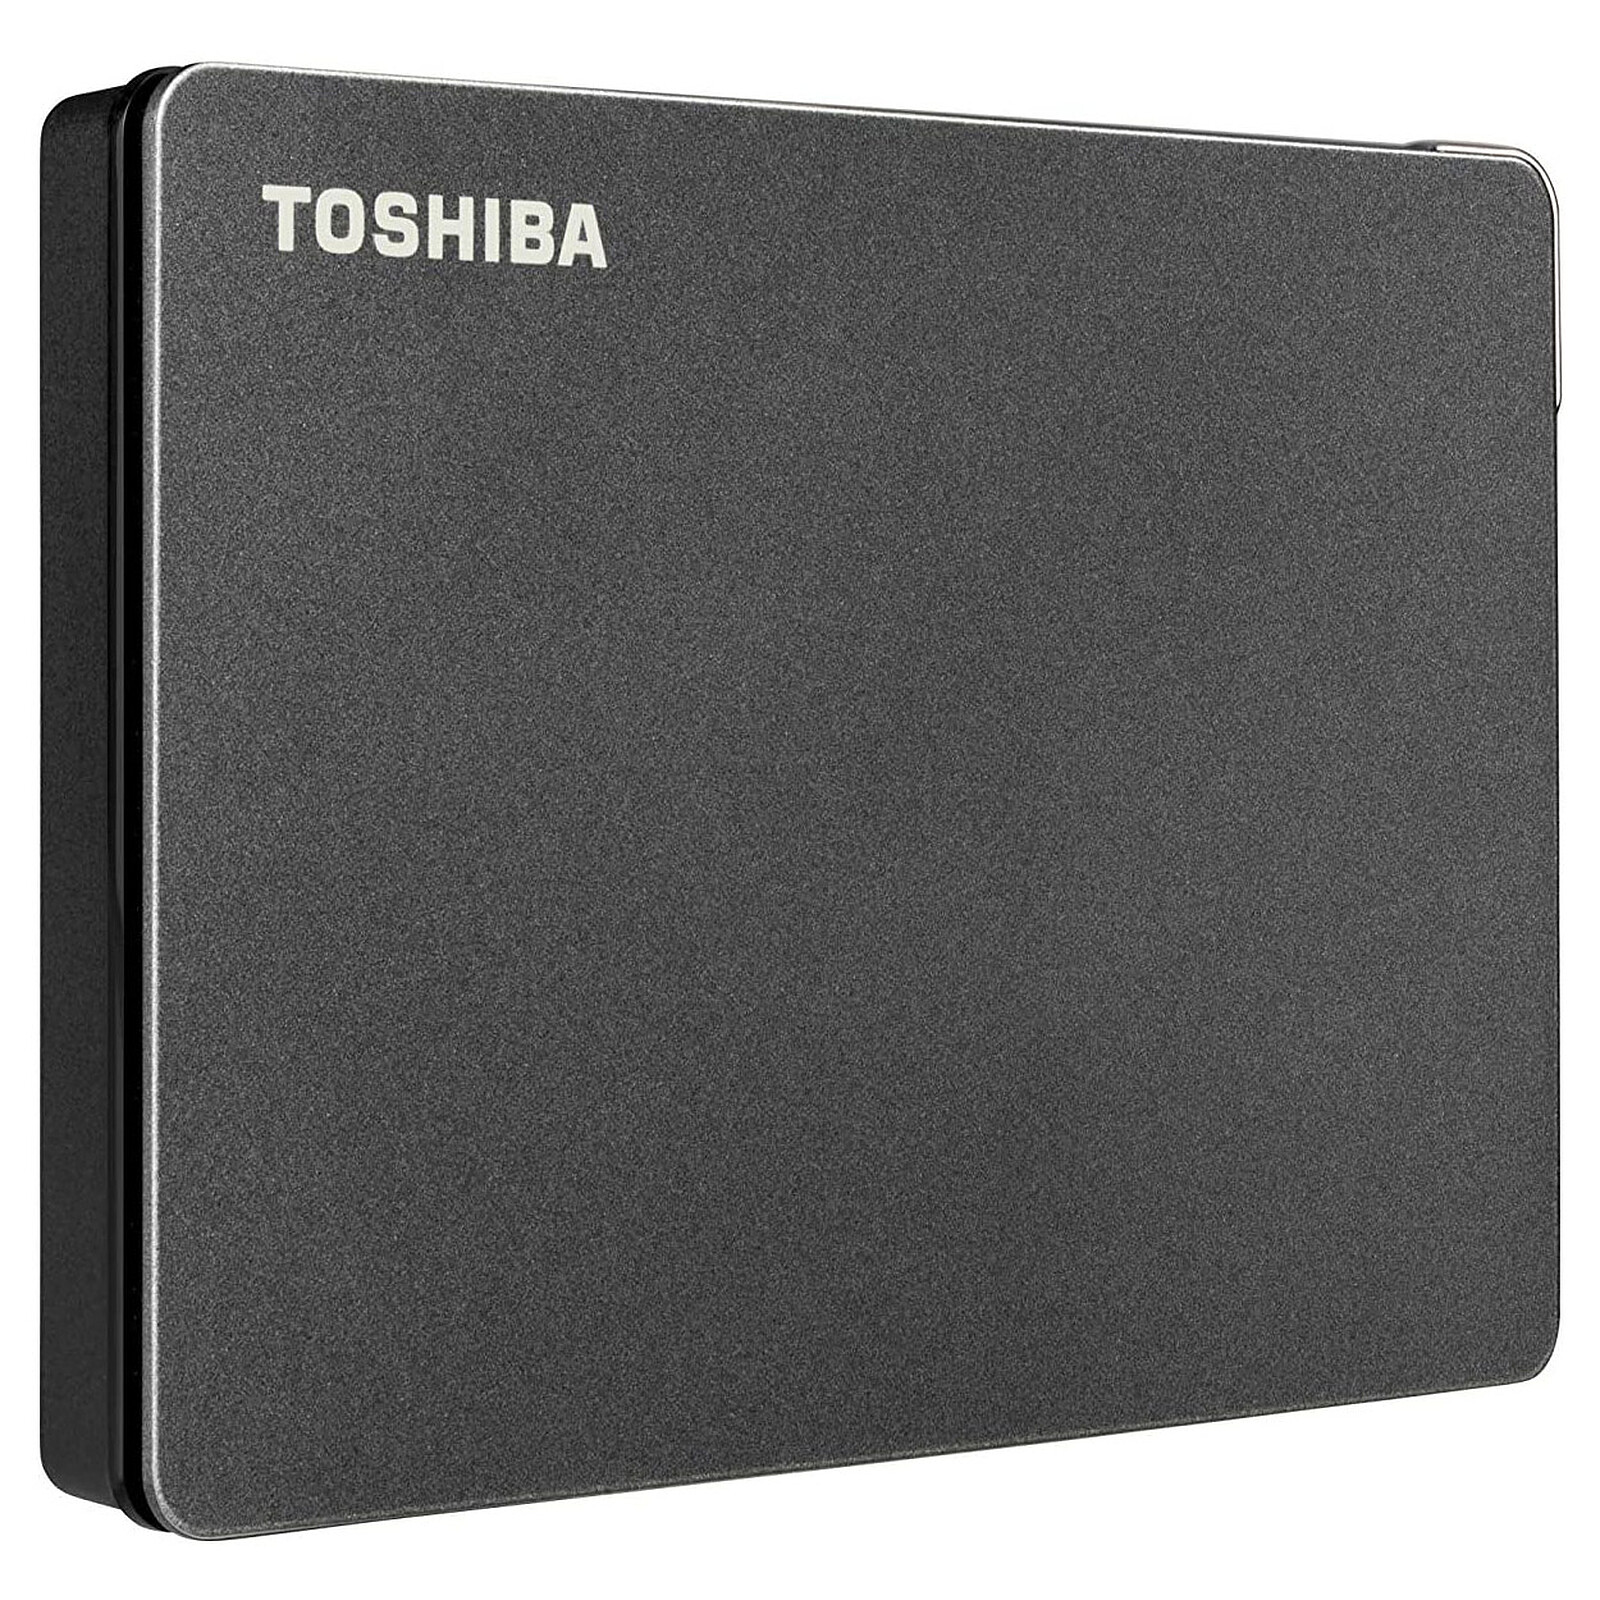 external hard drive for pc gaming